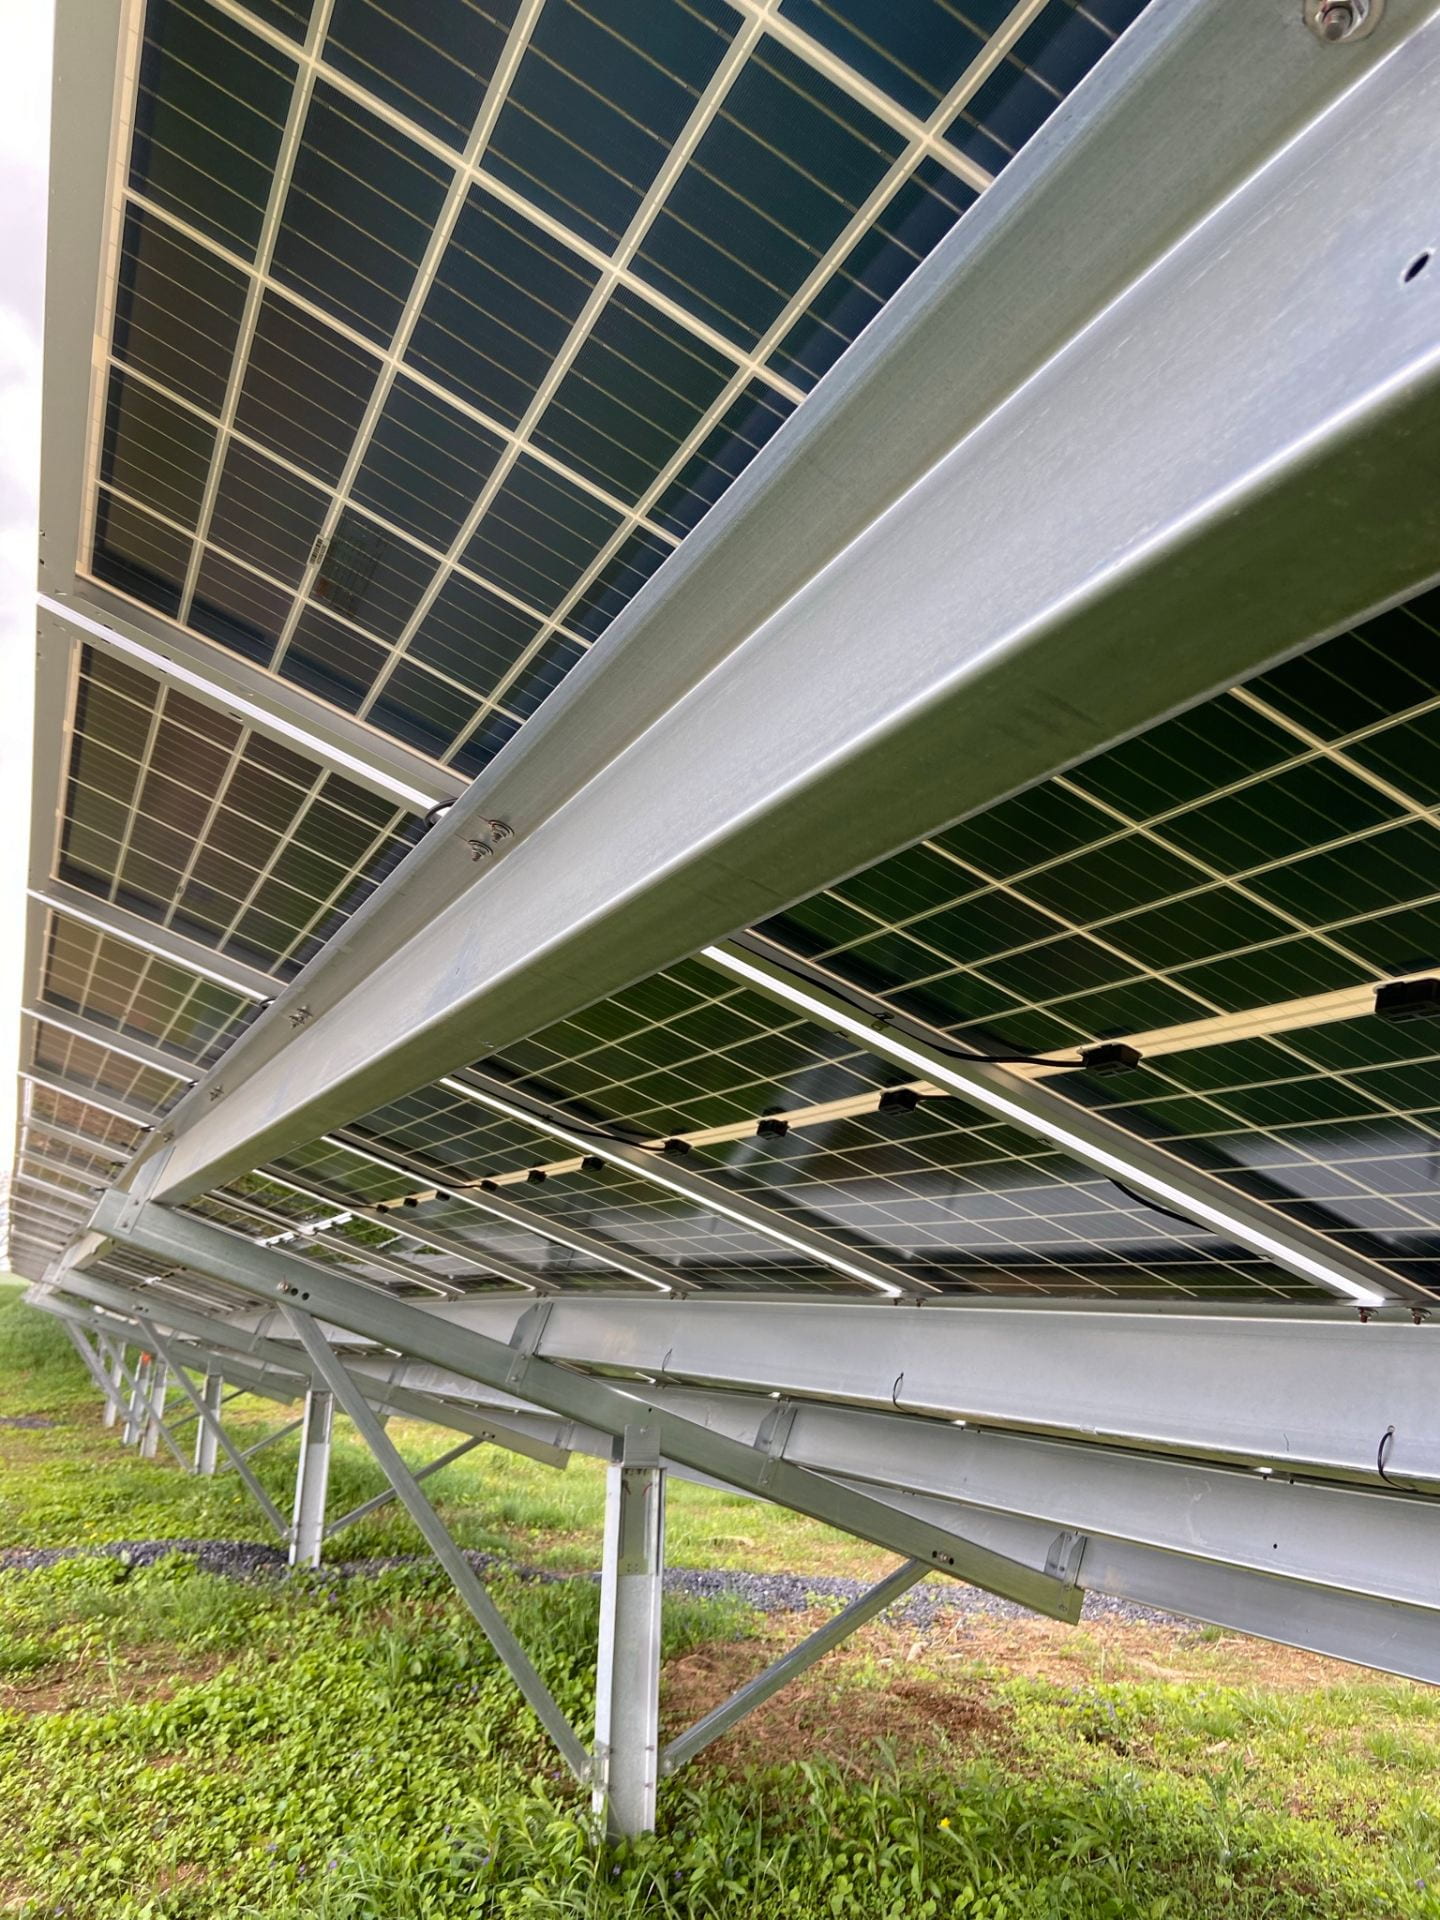 A bifacial panel generates electricity from both the upper and lower faces. Credit: Penn State MCOR